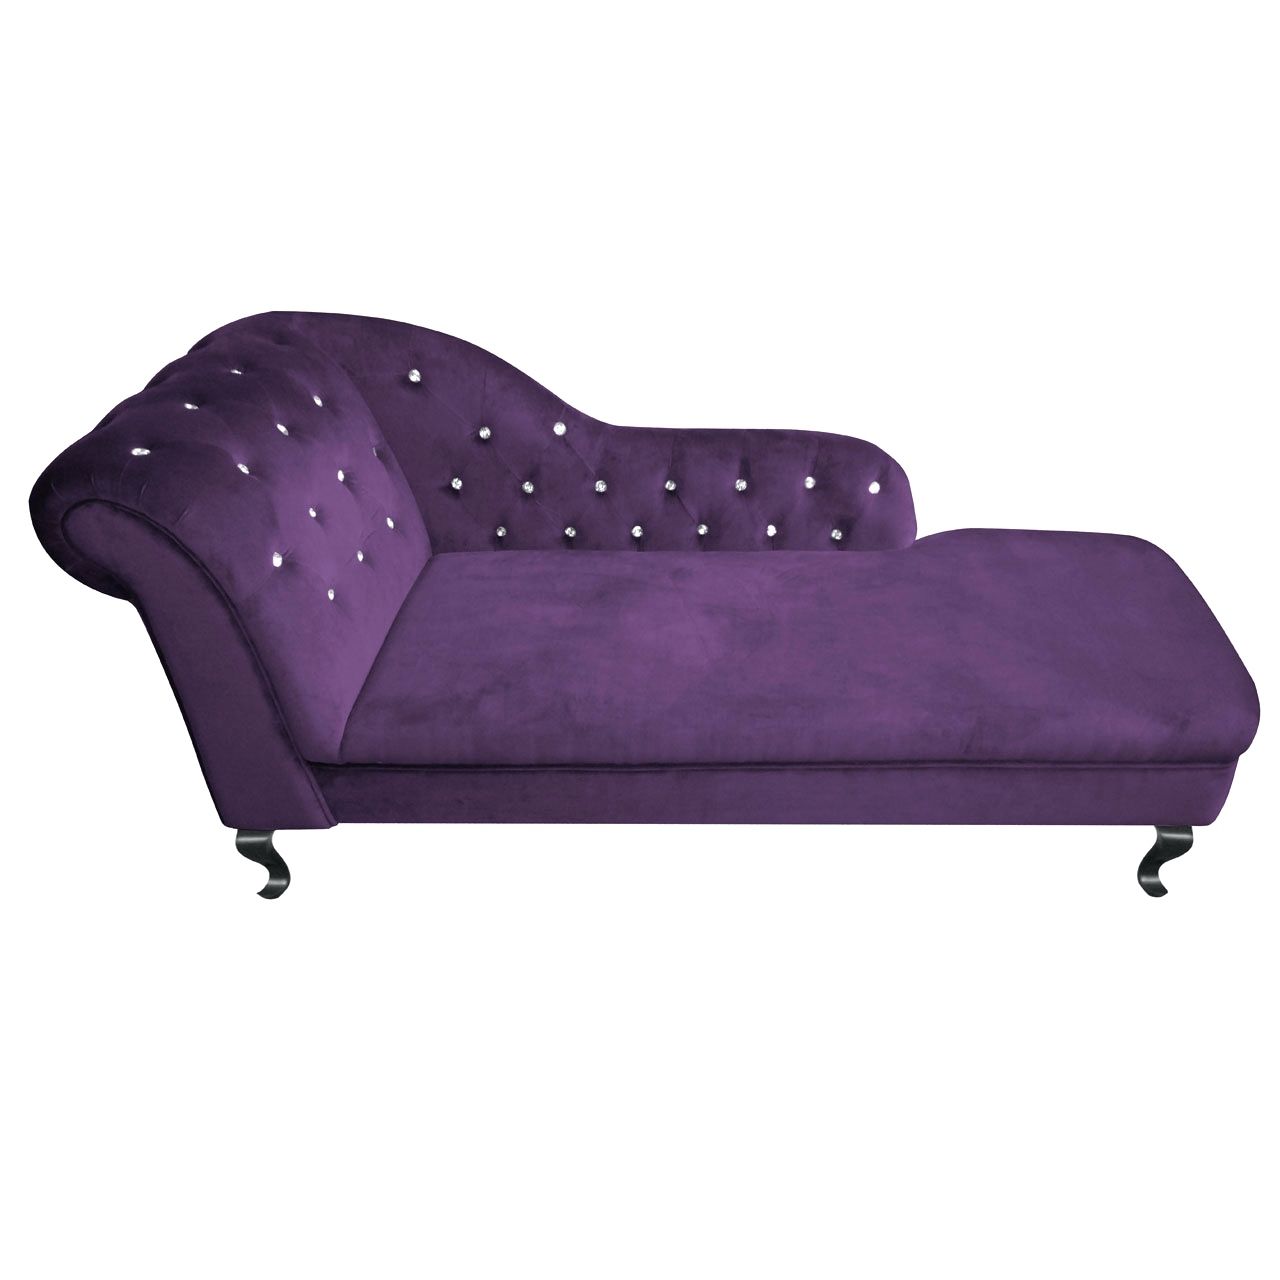 Handy Living Chaise Lounge Chair Purple • Lounge Chairs Ideas Inside Recent Purple Chaise Lounges (View 3 of 15)